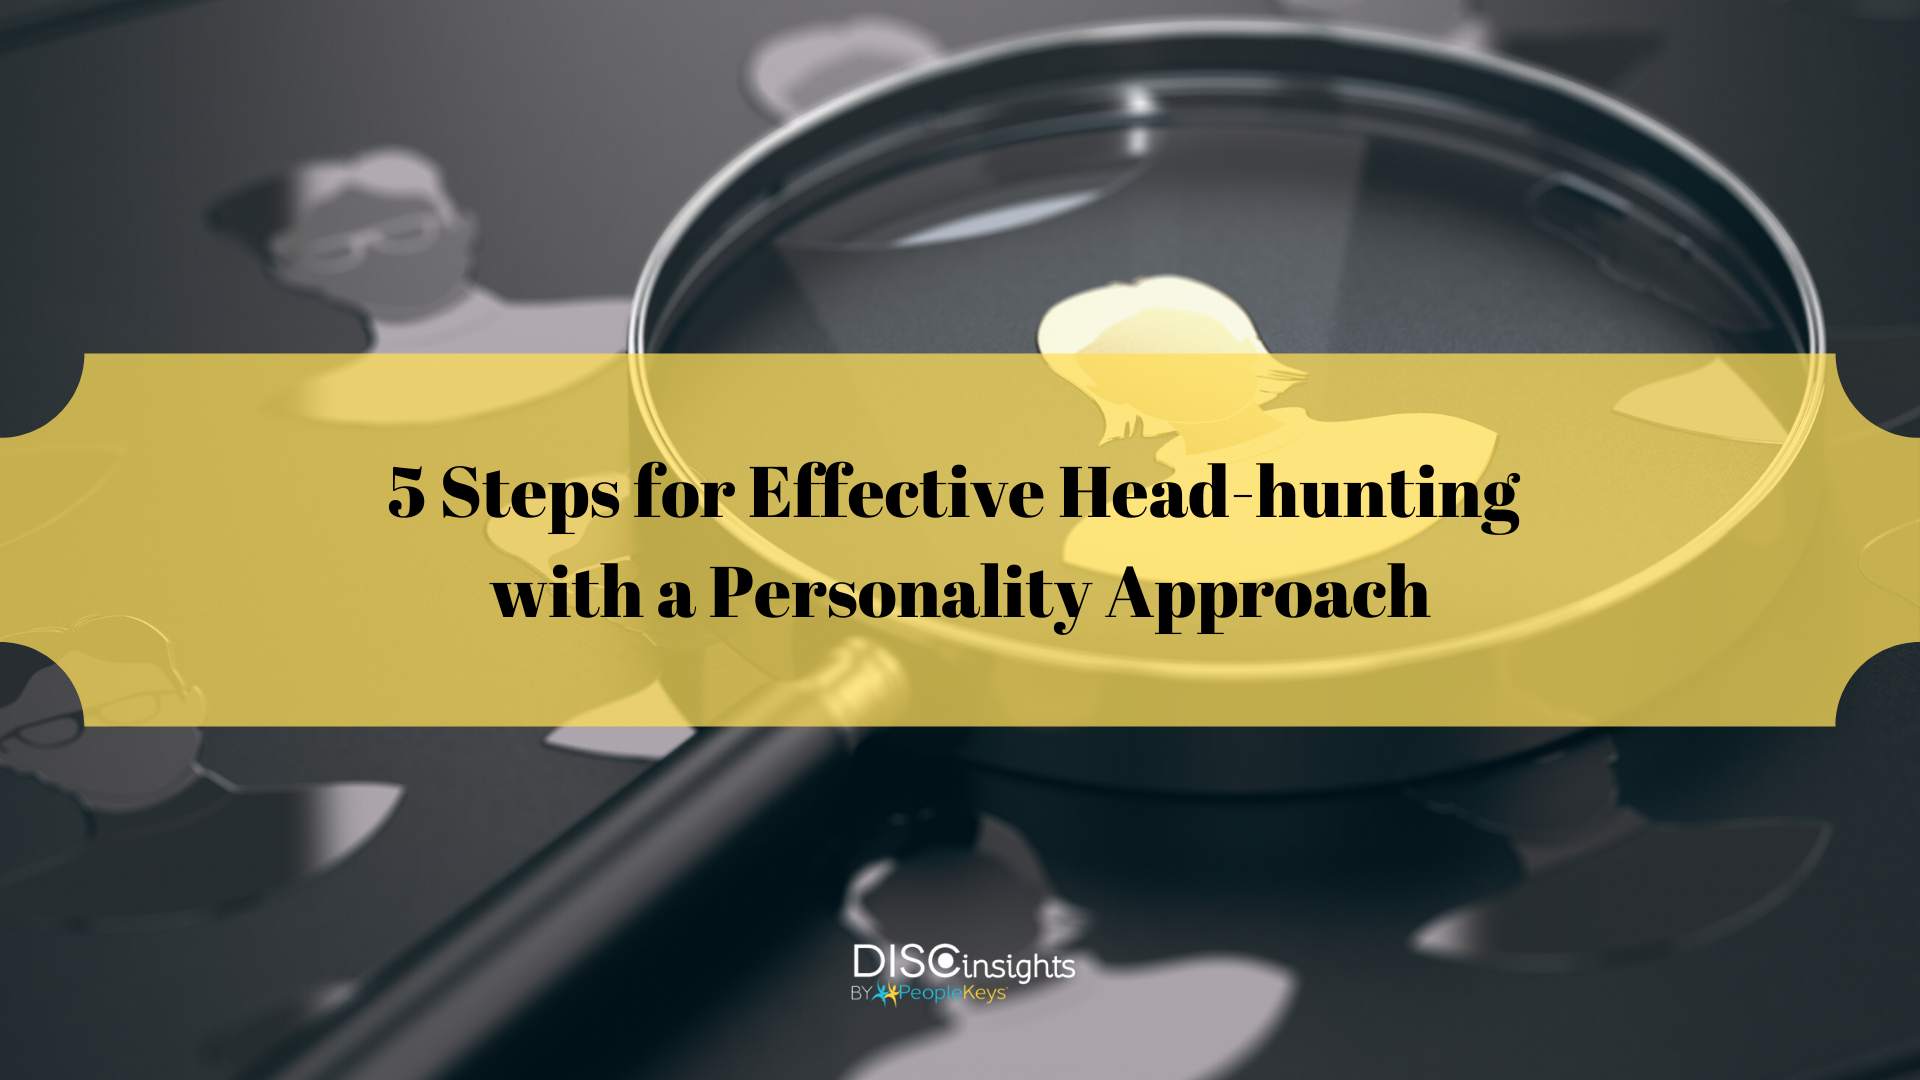 5 Steps for Effective Head-hunting